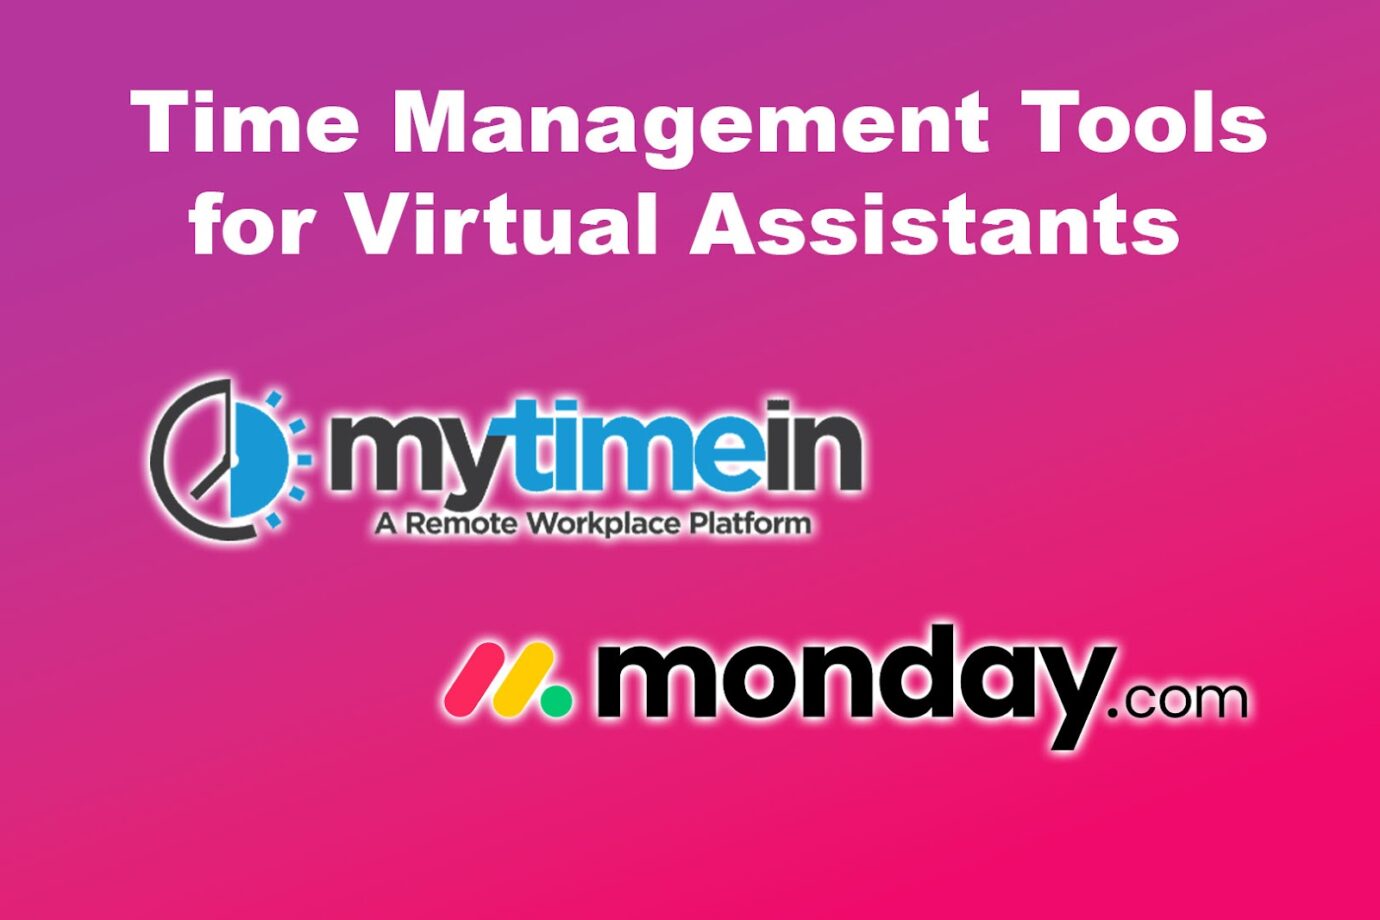 Time Management Tools for Virtual Assistants